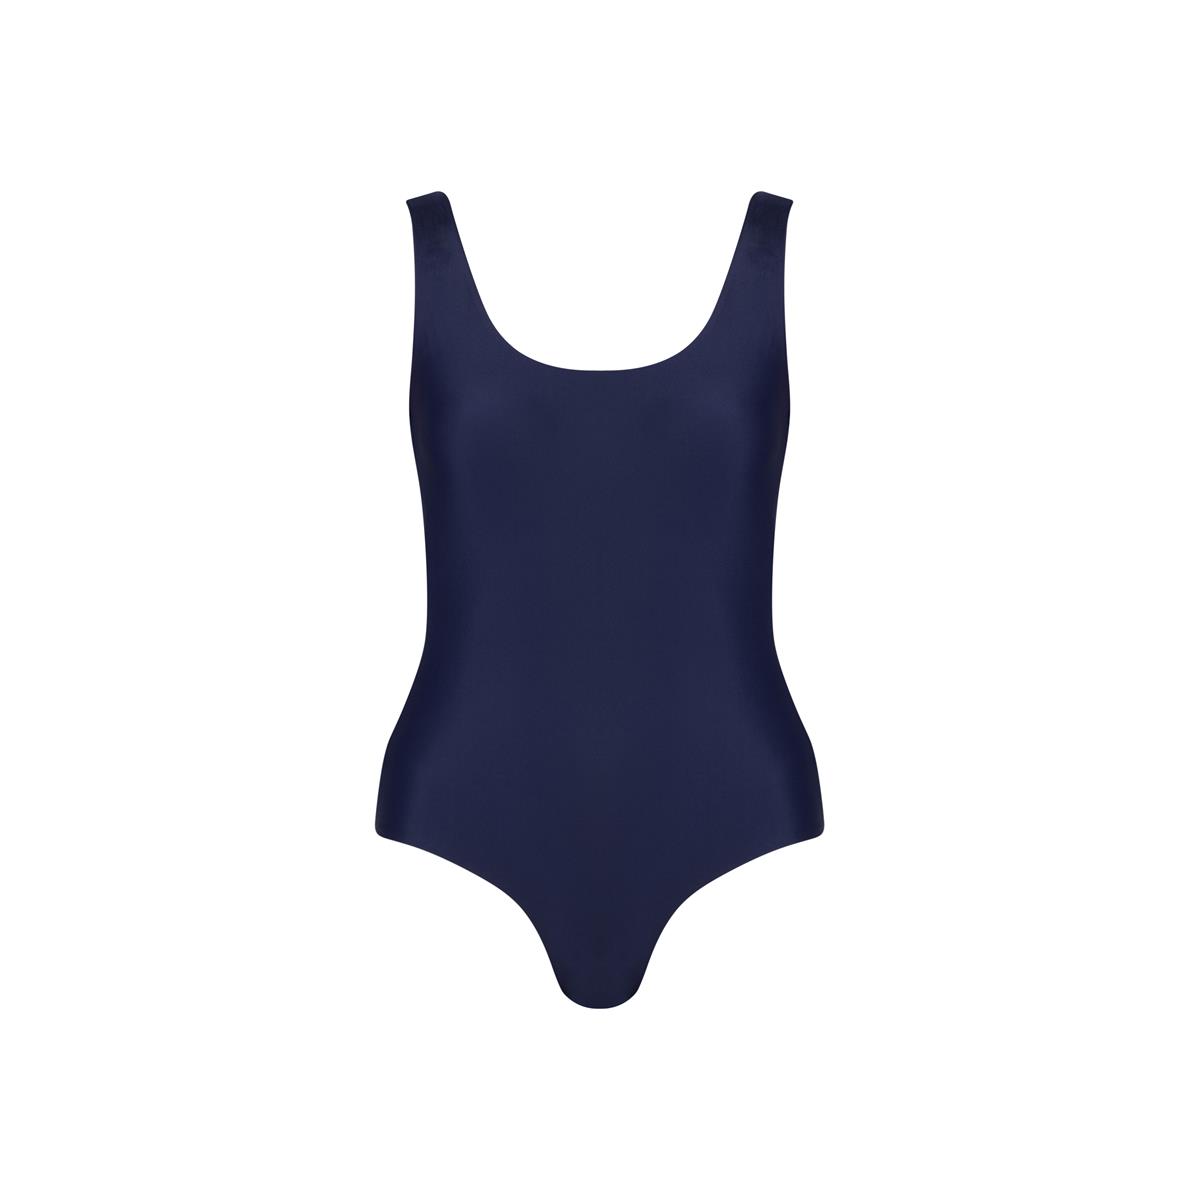 MARGARET AND HERMIONE_SS18_Swimsuit No.5_night_EUR 159,00